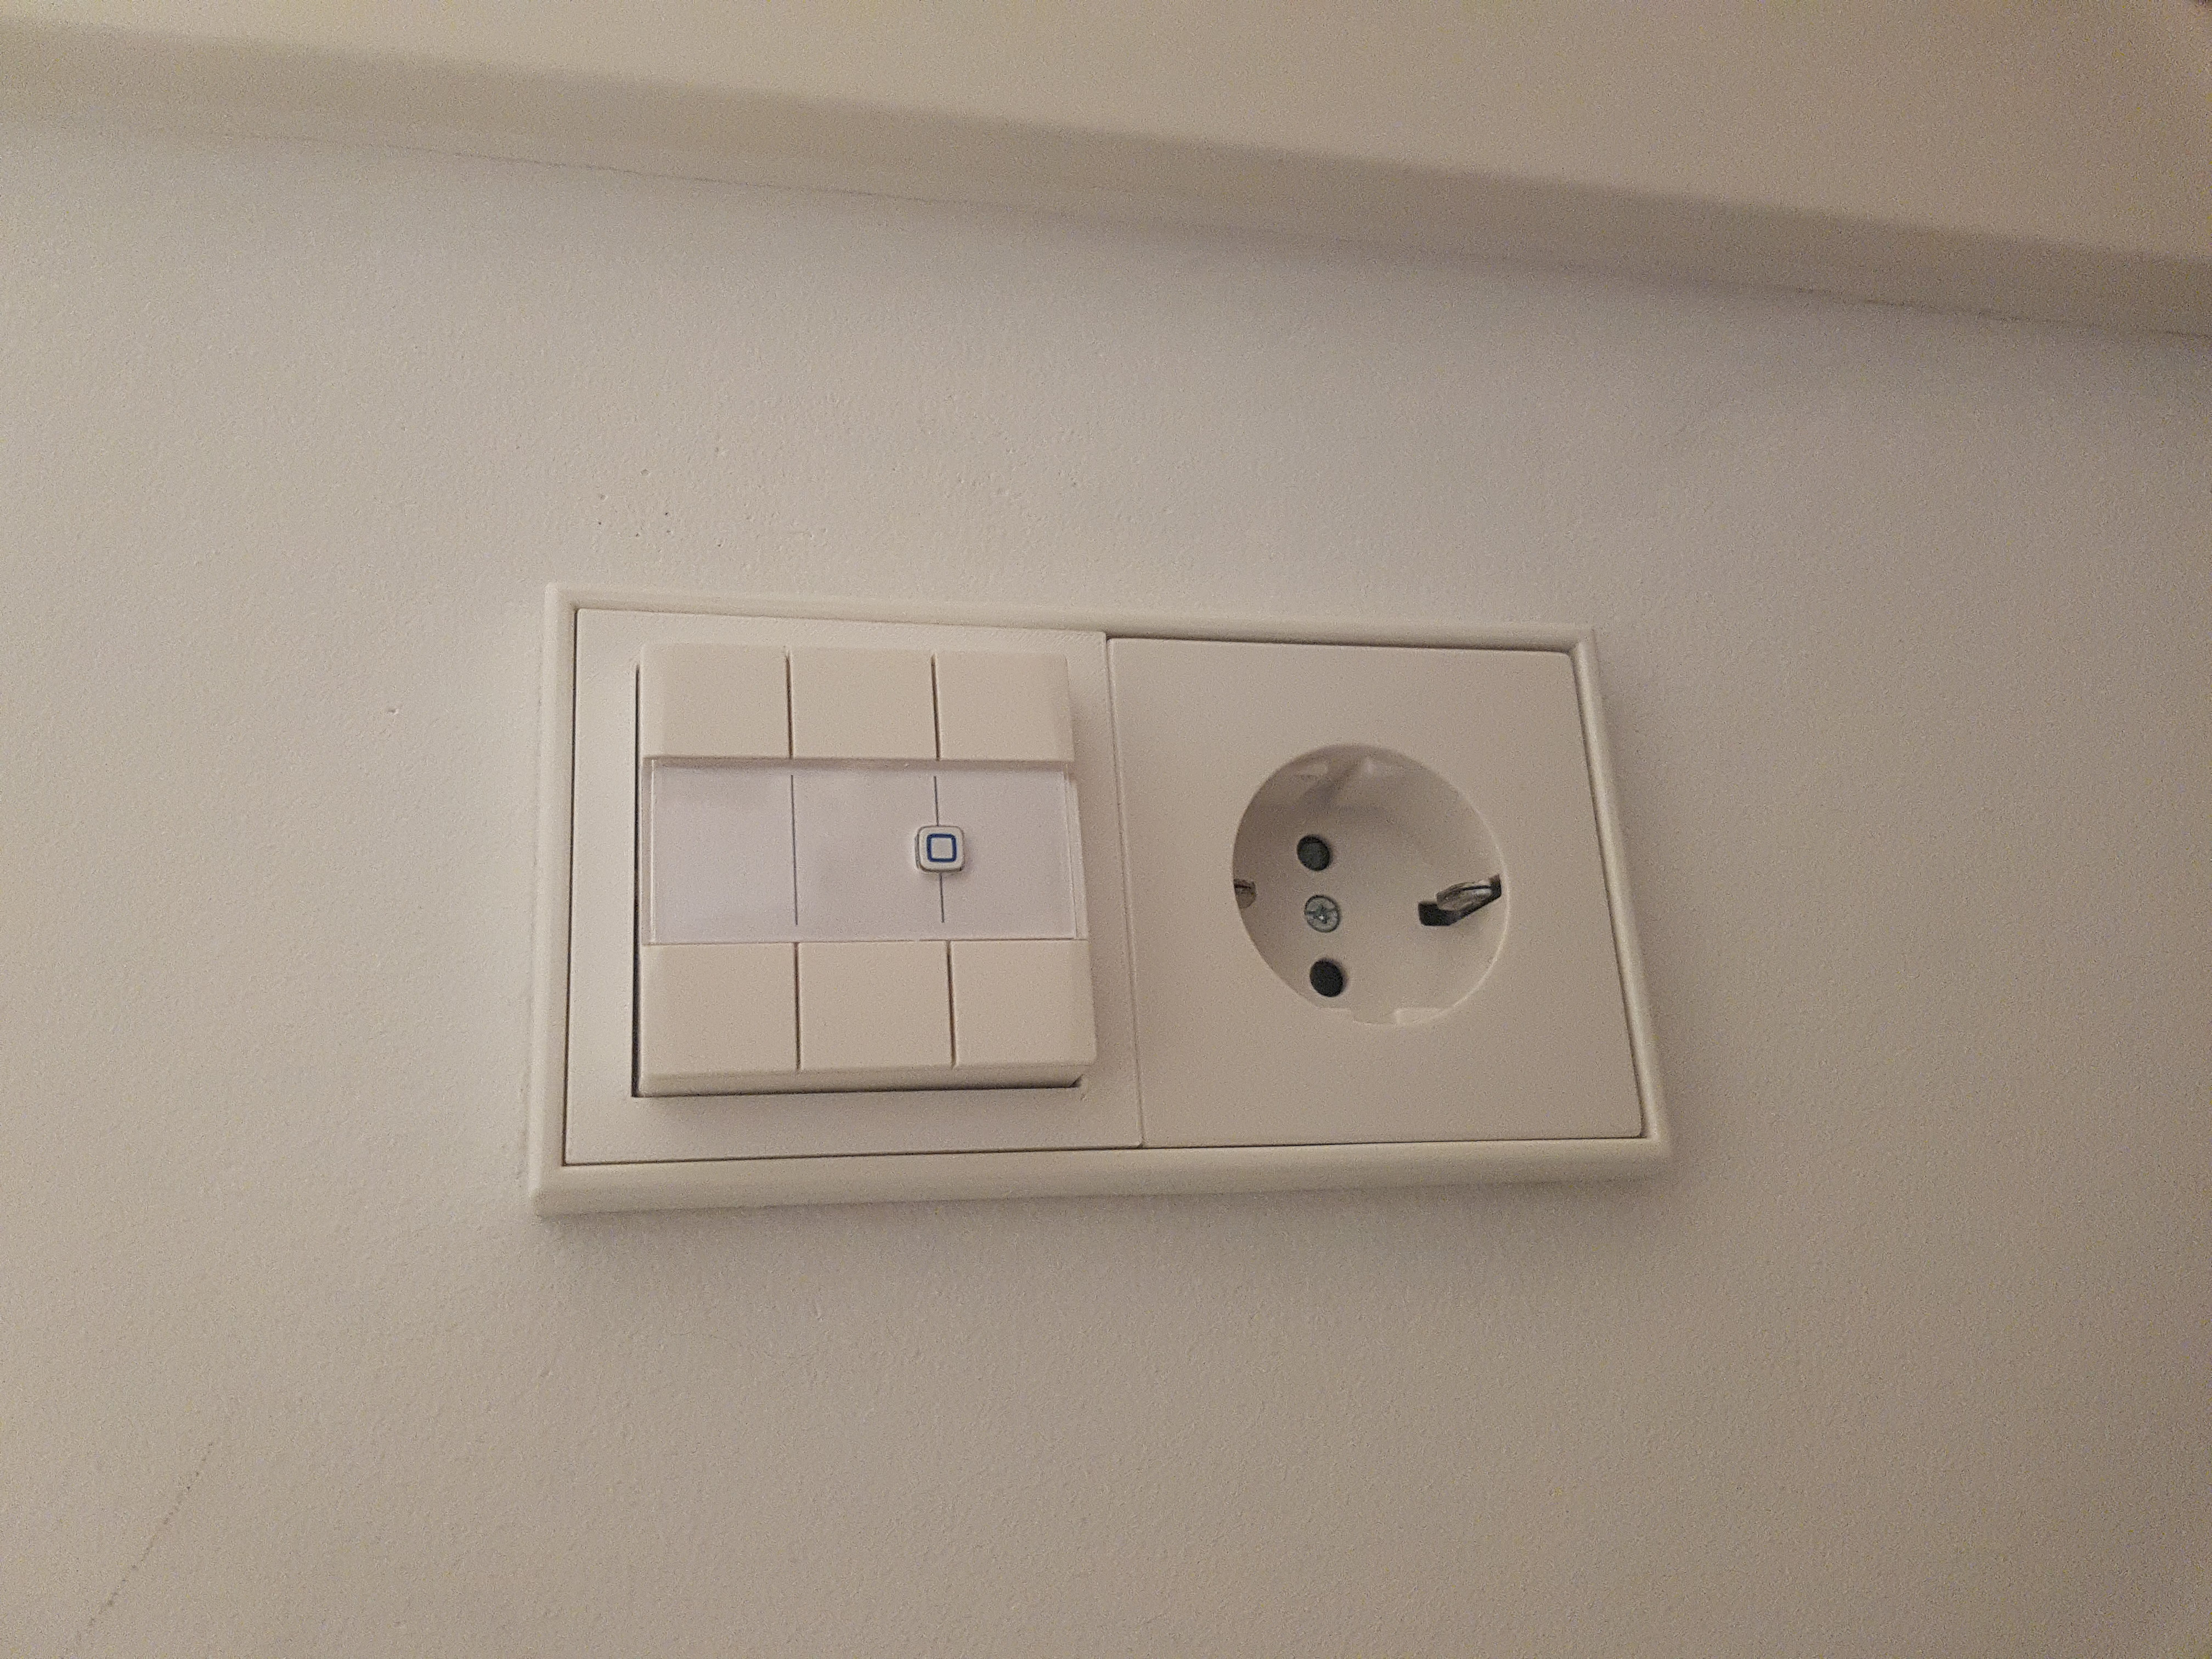 6x Wallswitch Homematic frame for Jung Outlets LS 990 (The big Square ones)